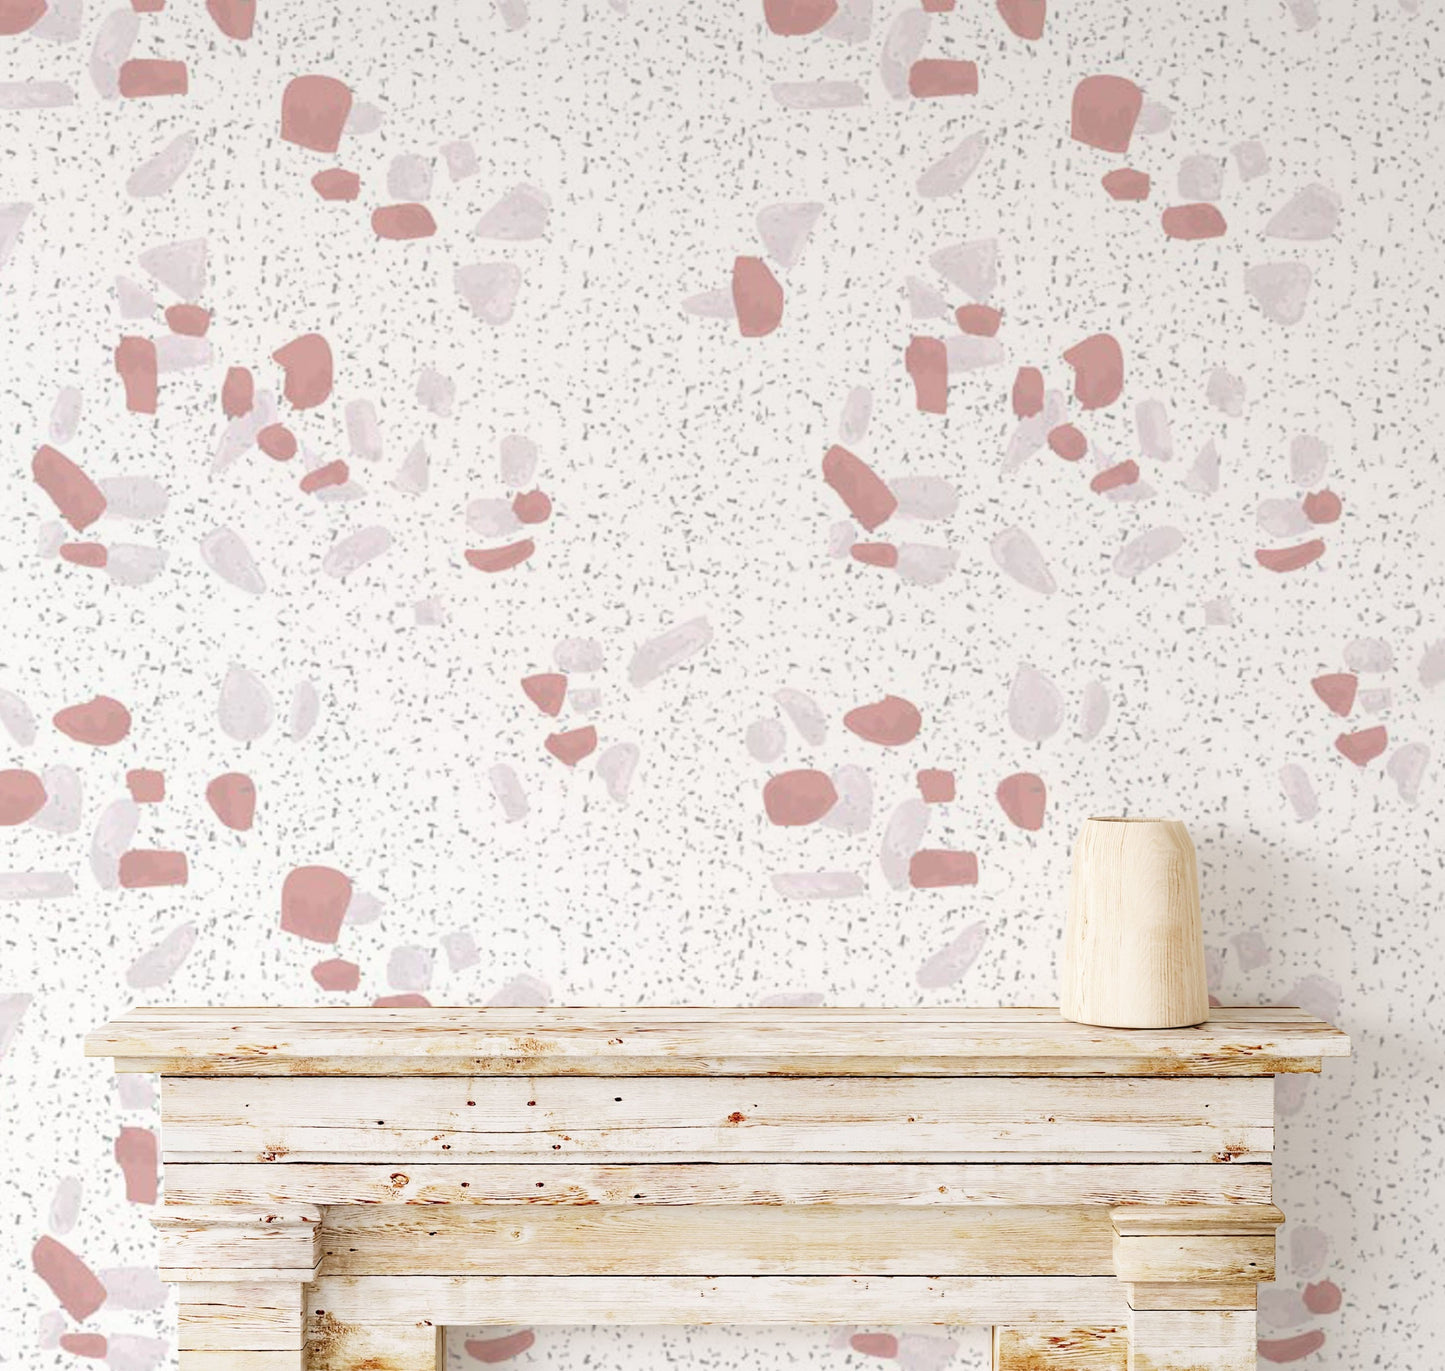 Wallpaper mural in the bedroom featuring a white chip and marble pattern